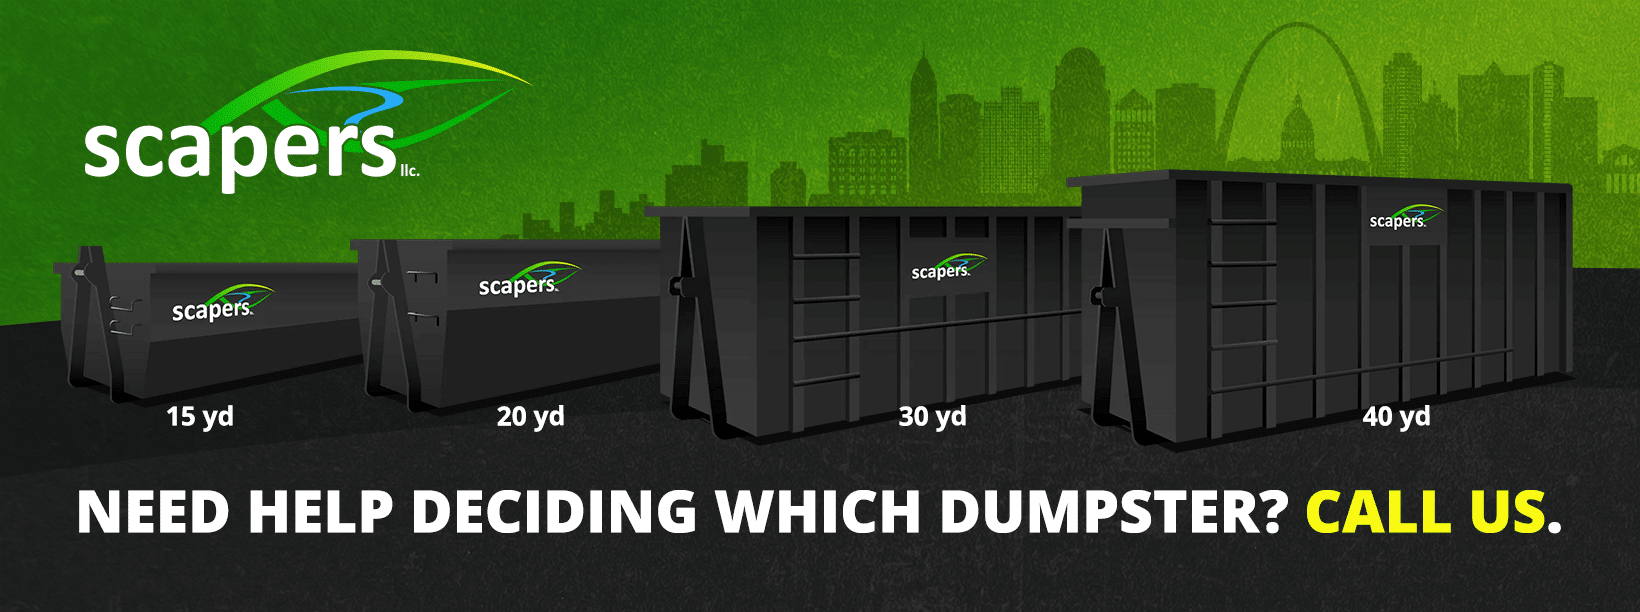 Need help deciding which dumpster? Call us